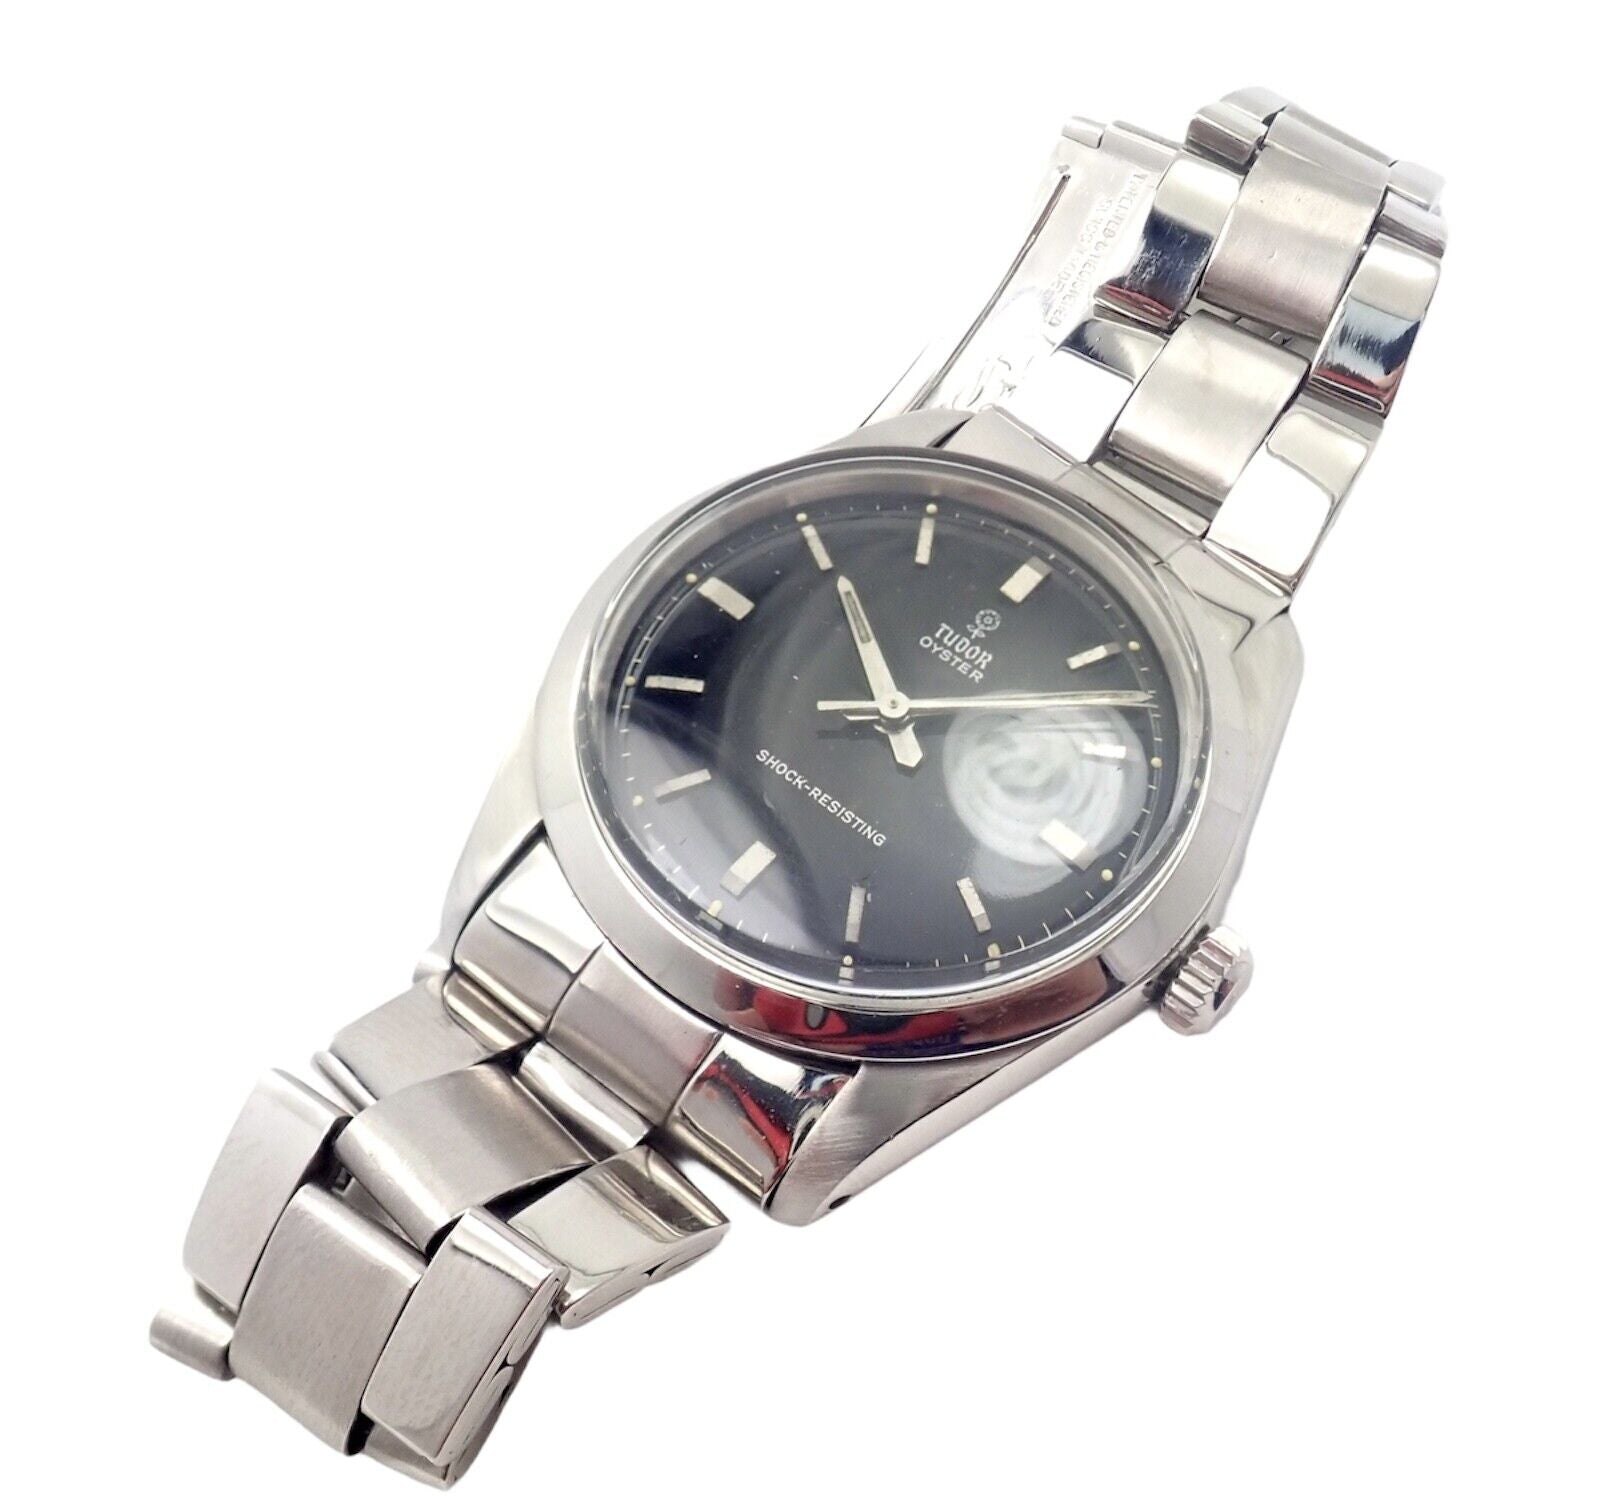 Rolex Tudor Jewelry & Watches:Watches, Parts & Accessories:Watches:Wristwatches Authentic Vintage! Rolex Tudor Stainless Steel Manual Oyster Rose Logo Watch